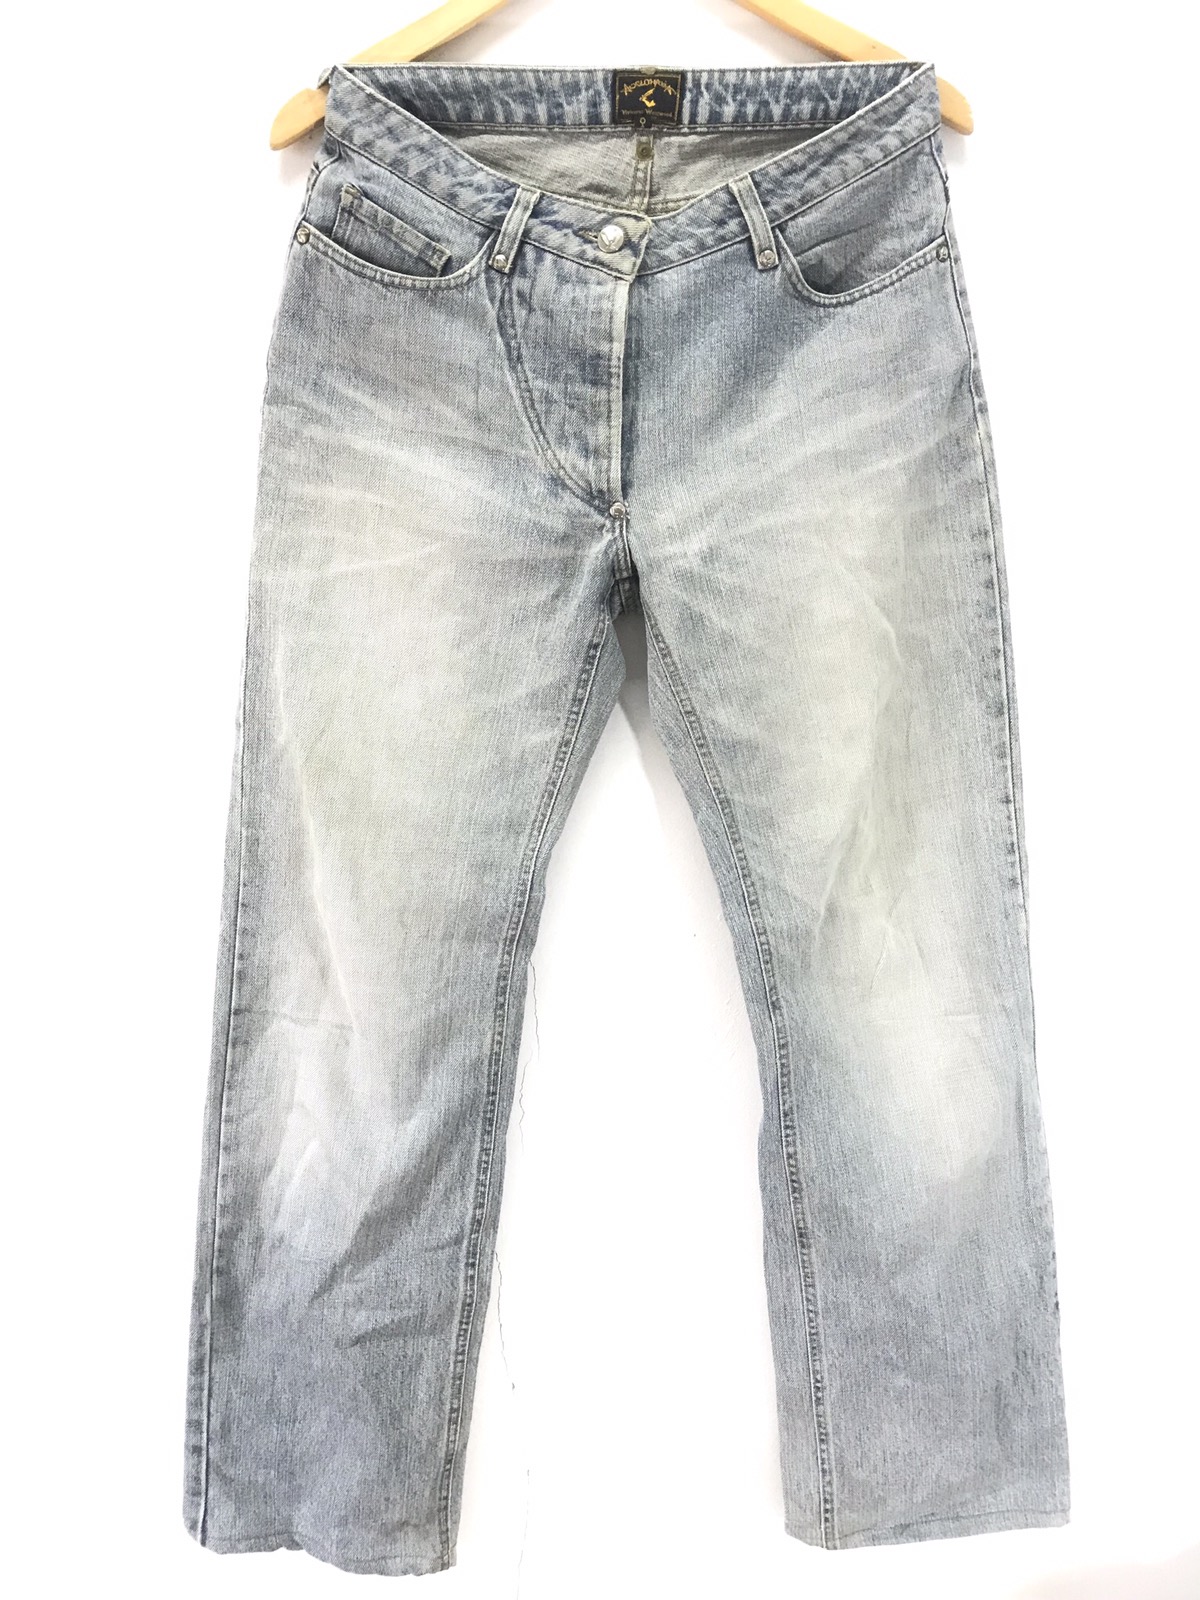 🔥Vivienne Westwood Anglomania Faded Session Jean - 5